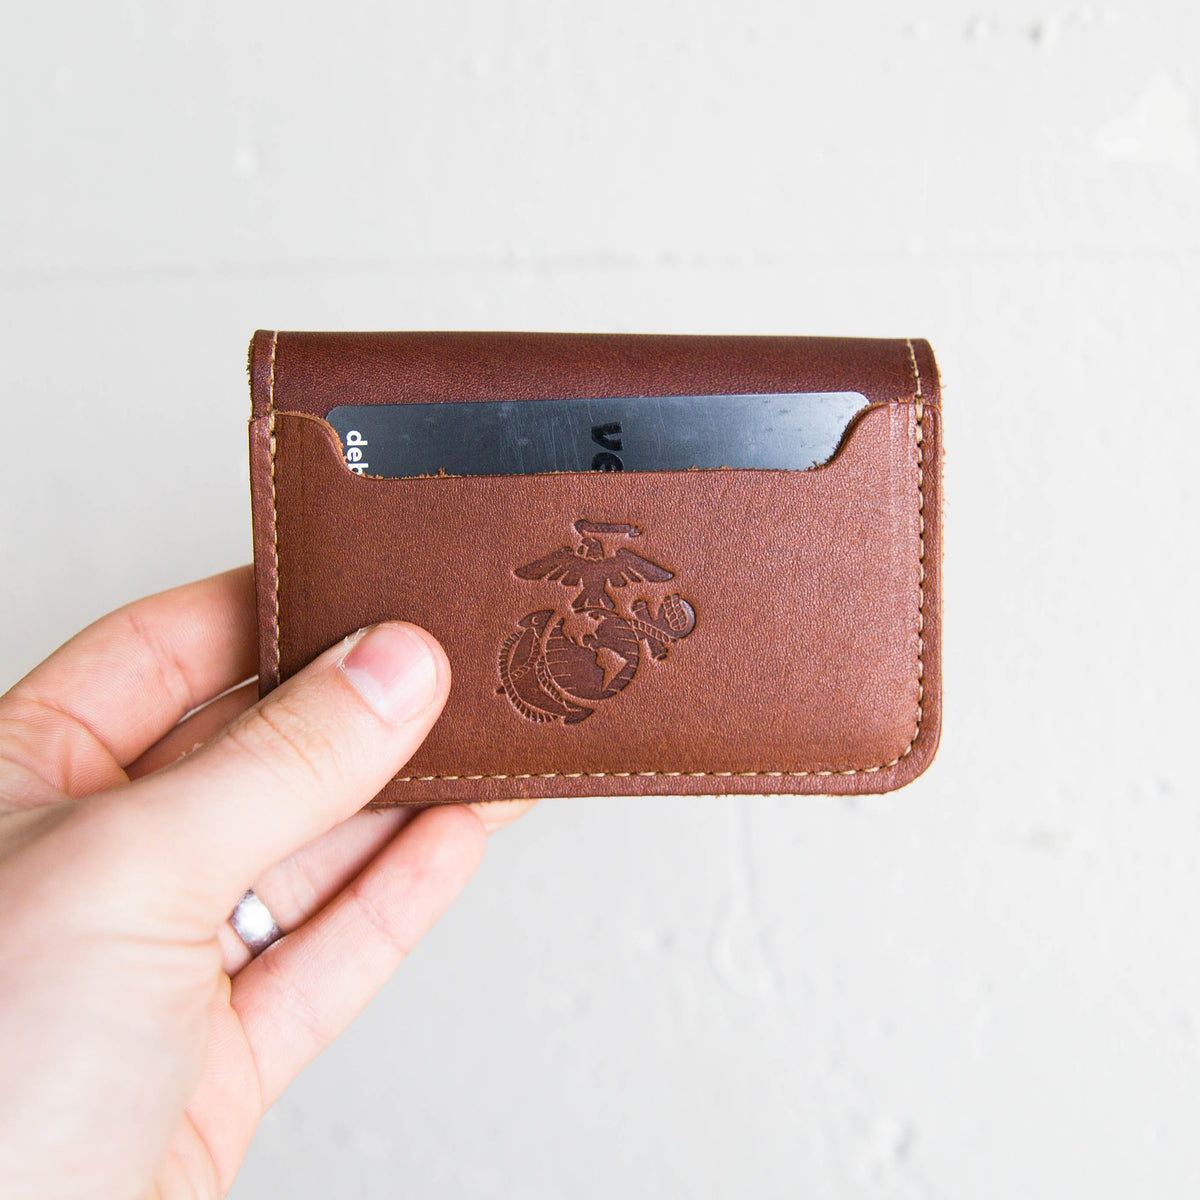 Fine leather bifold money clip wallet with Marine Corps logo